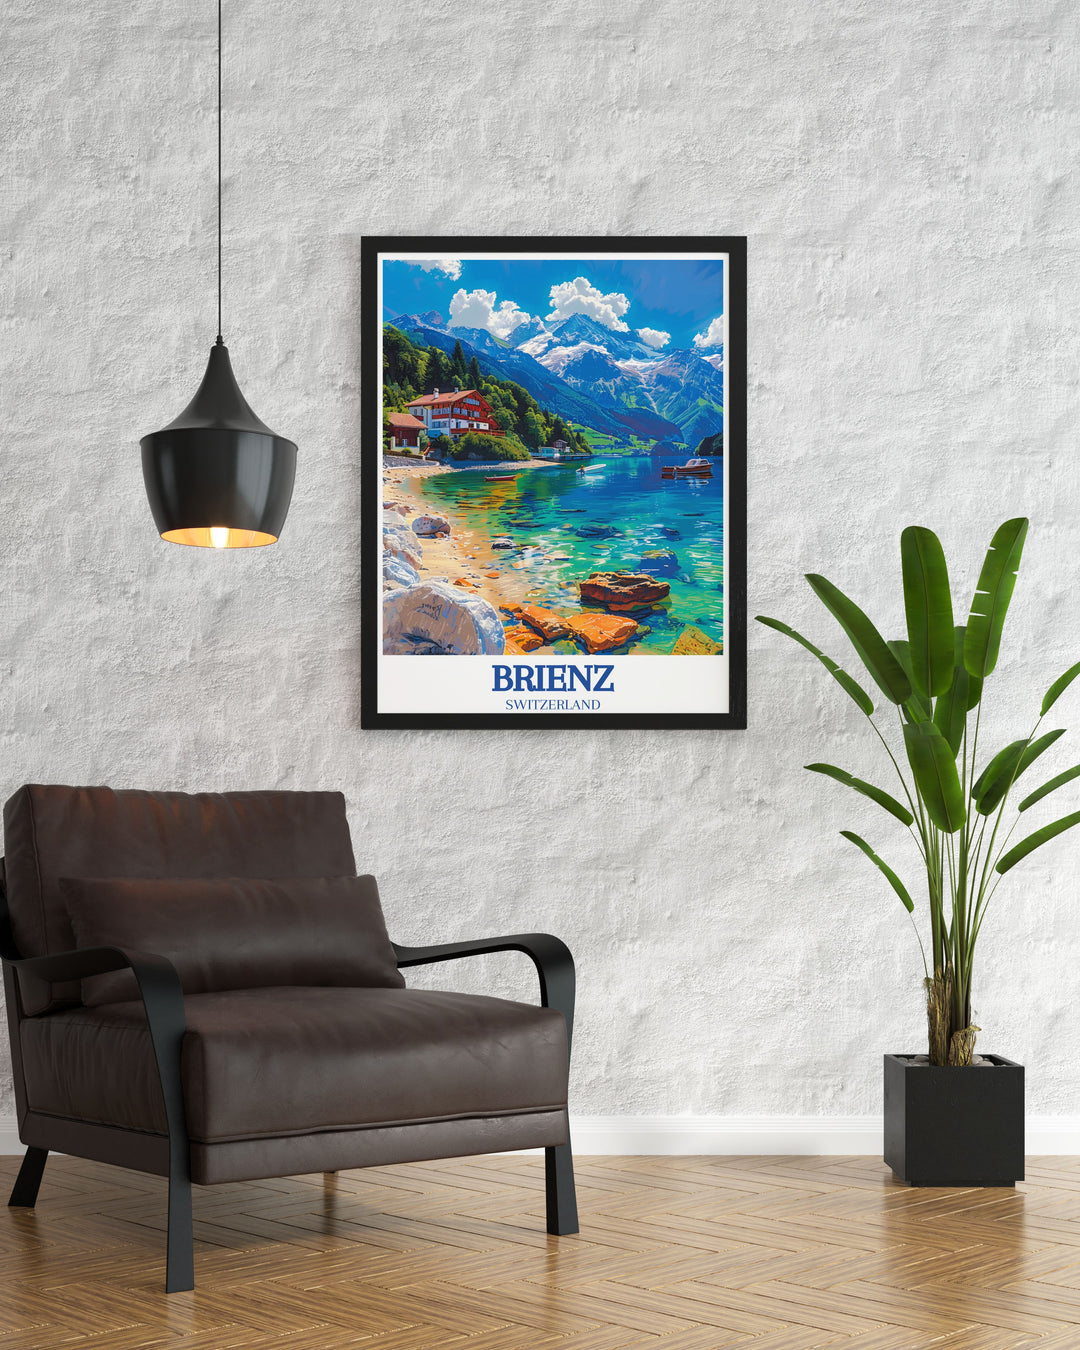 Lake Brienz, Brienzer Rothorn framed print featuring stunning Swiss landscapes. Perfect for retro travel poster collectors and lovers of vintage travel prints. A beautiful addition to any wall.